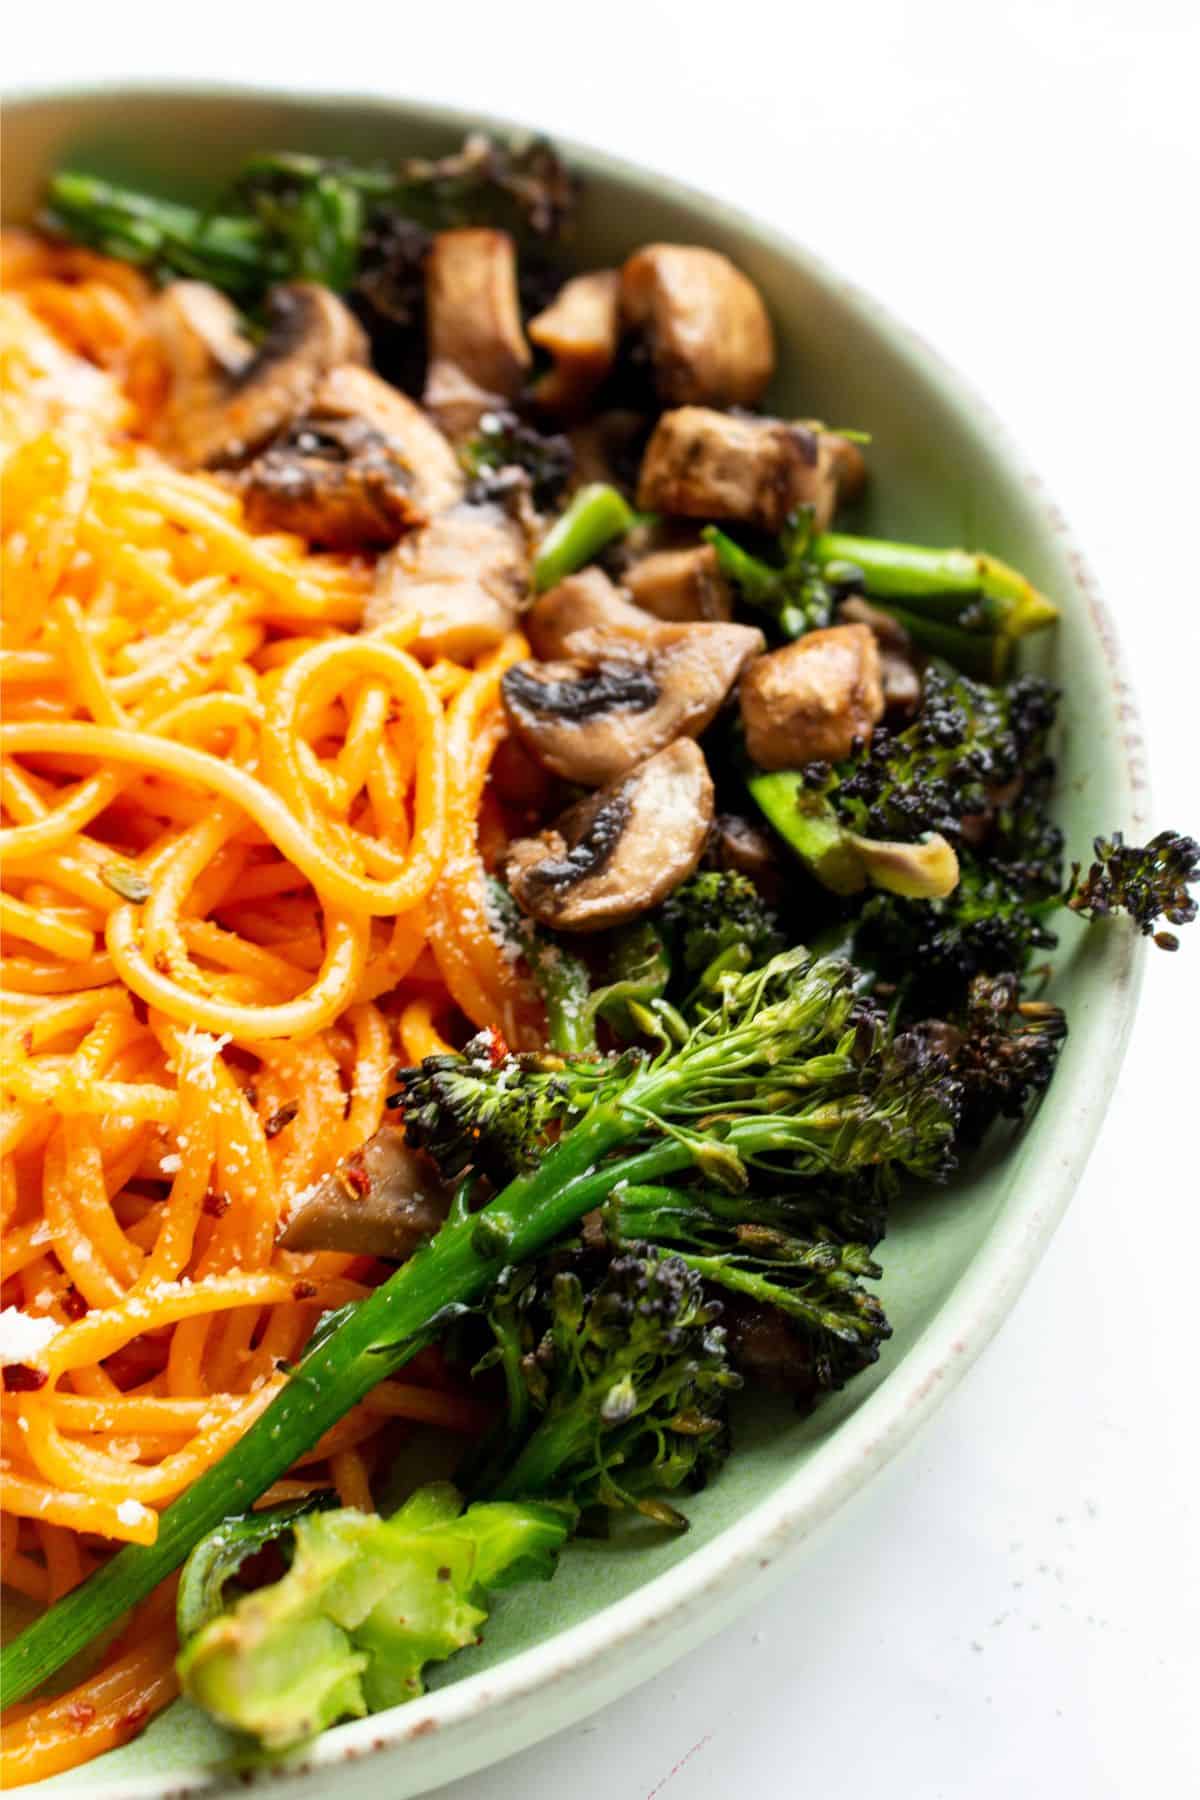 Half photo of bowl of spaghetti with mushrooms and broccoli on a green bowl on a white background.